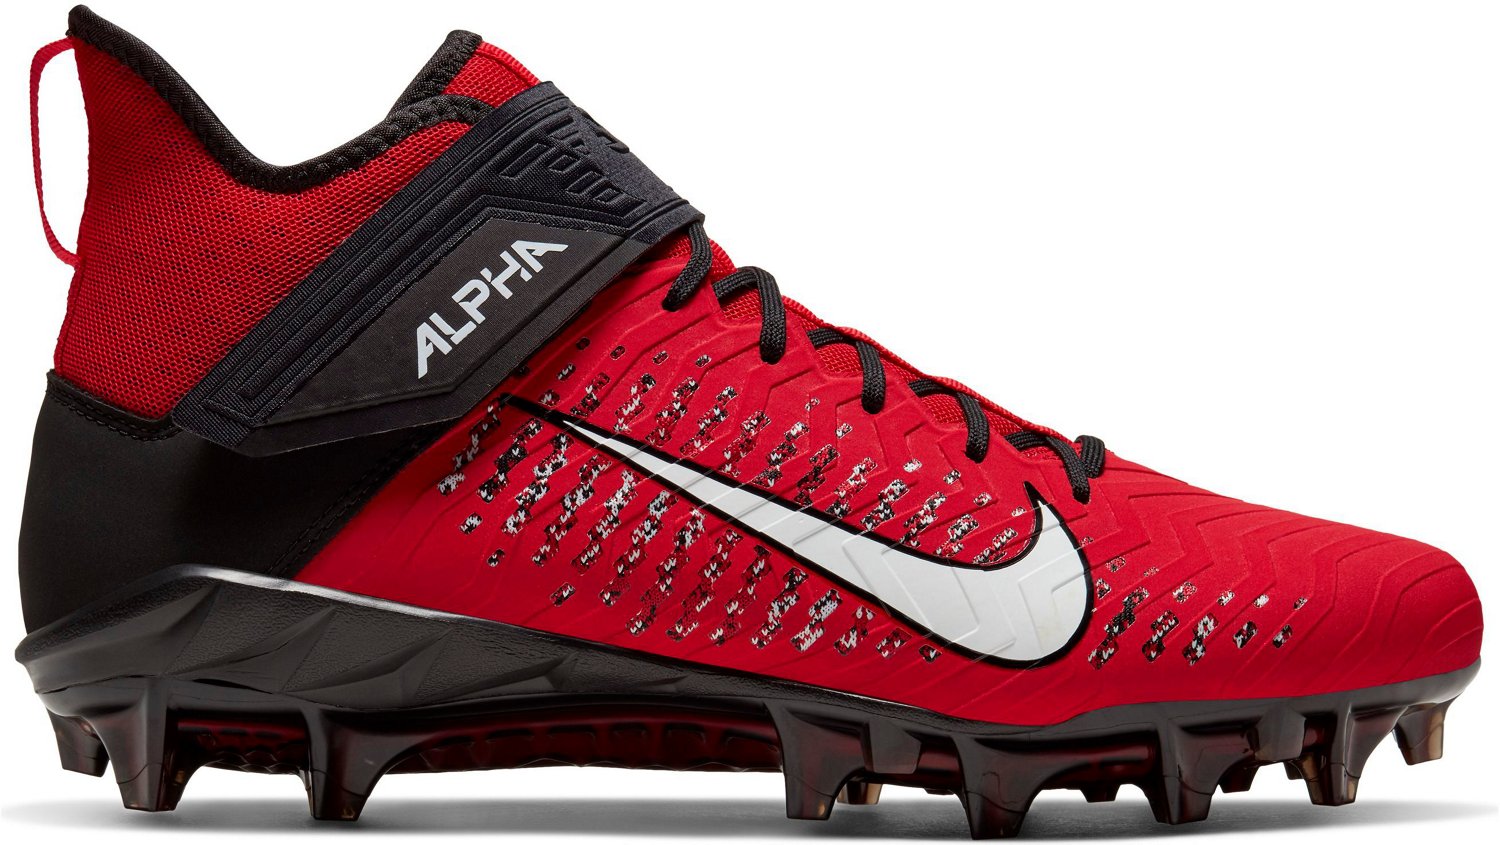 Mid Football Cleats Red 